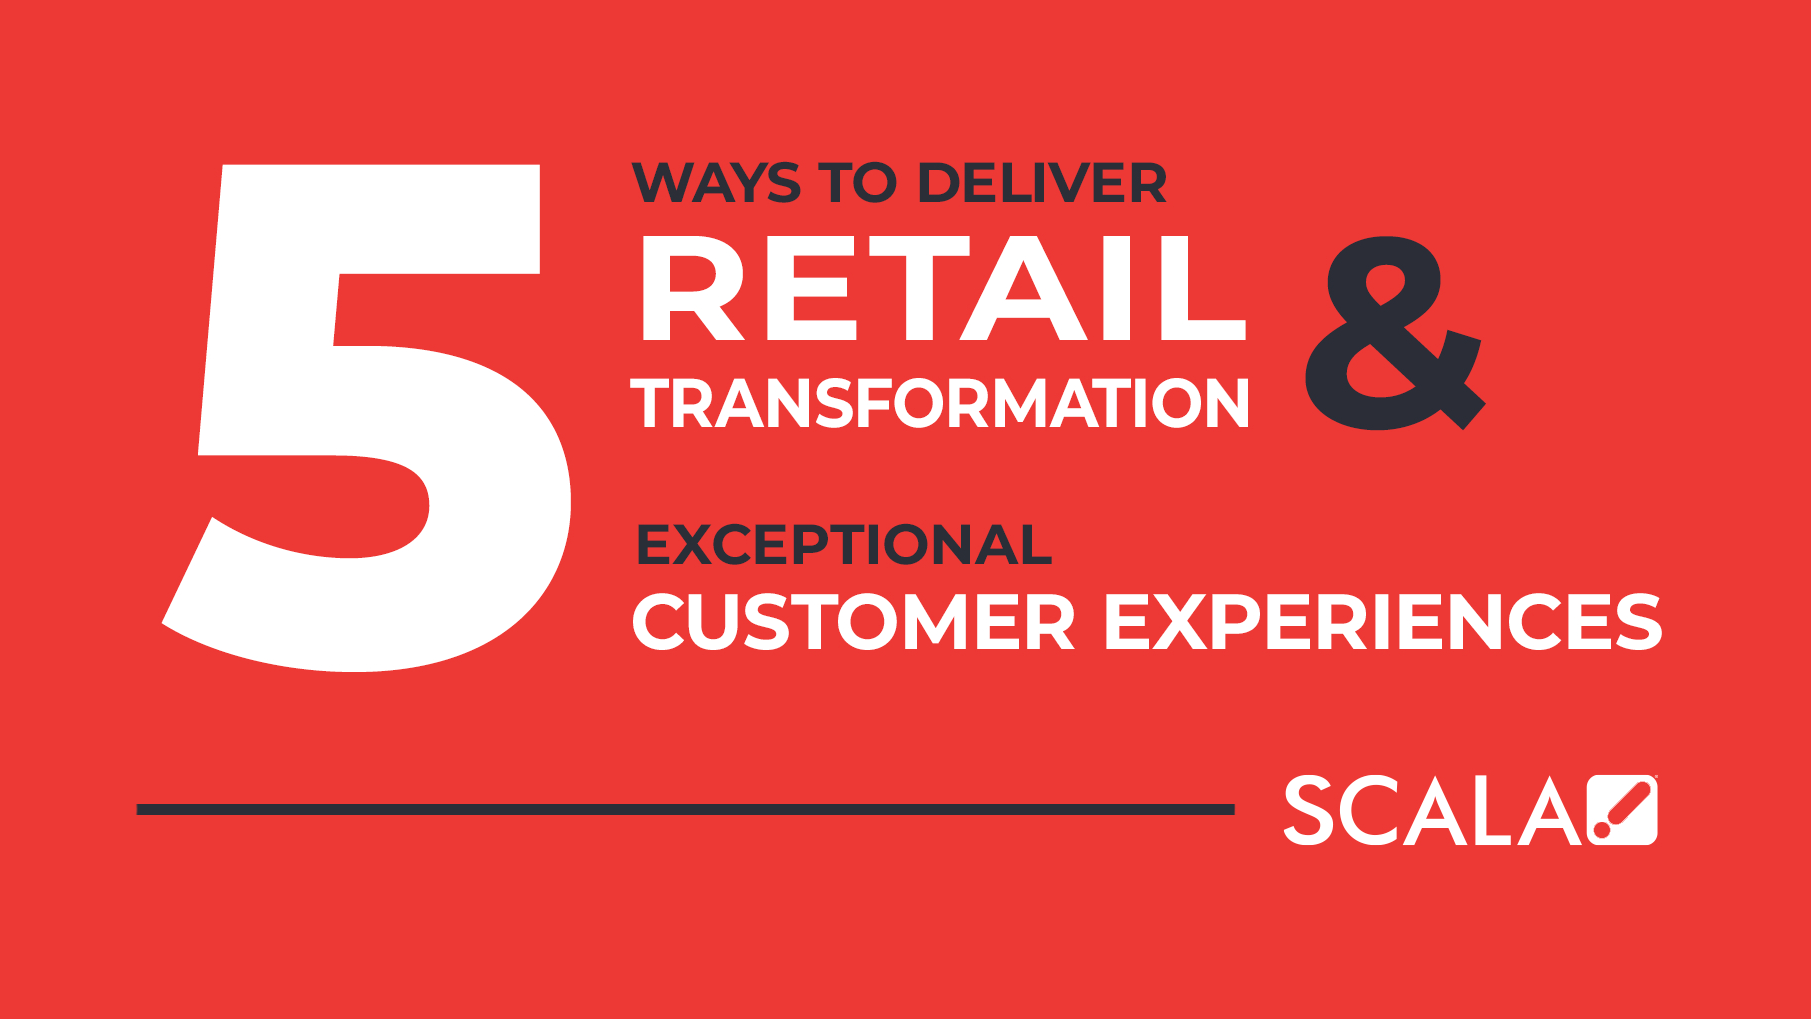 Img Card Scala Retail Infographic 2020